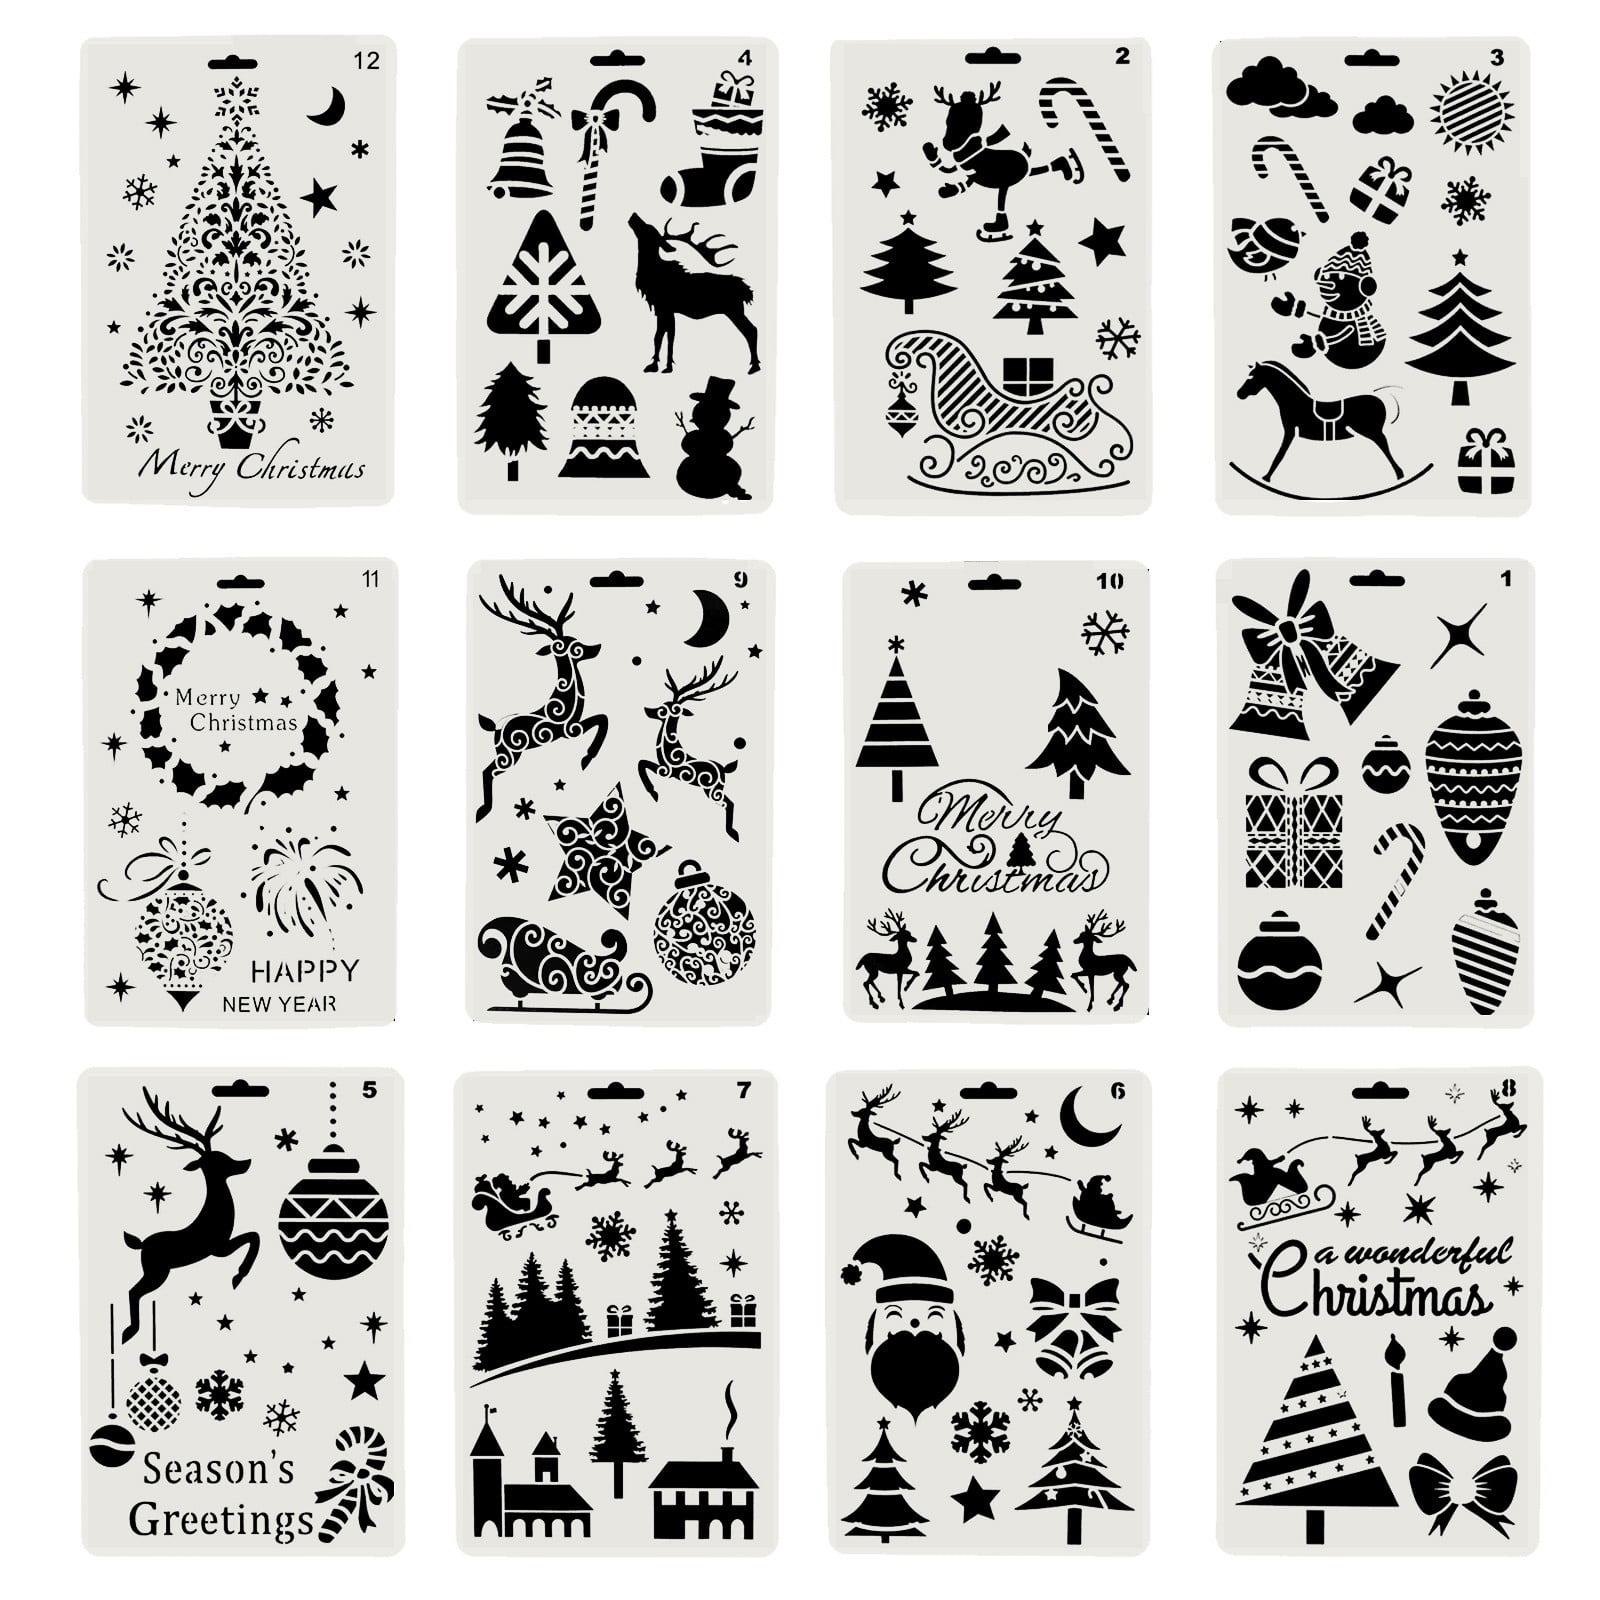 22 Pieces Christmas Stencils Templates Reusable Craft Christmas Letters Art Drawing Painting Templates for Window Glass Door Car Body 